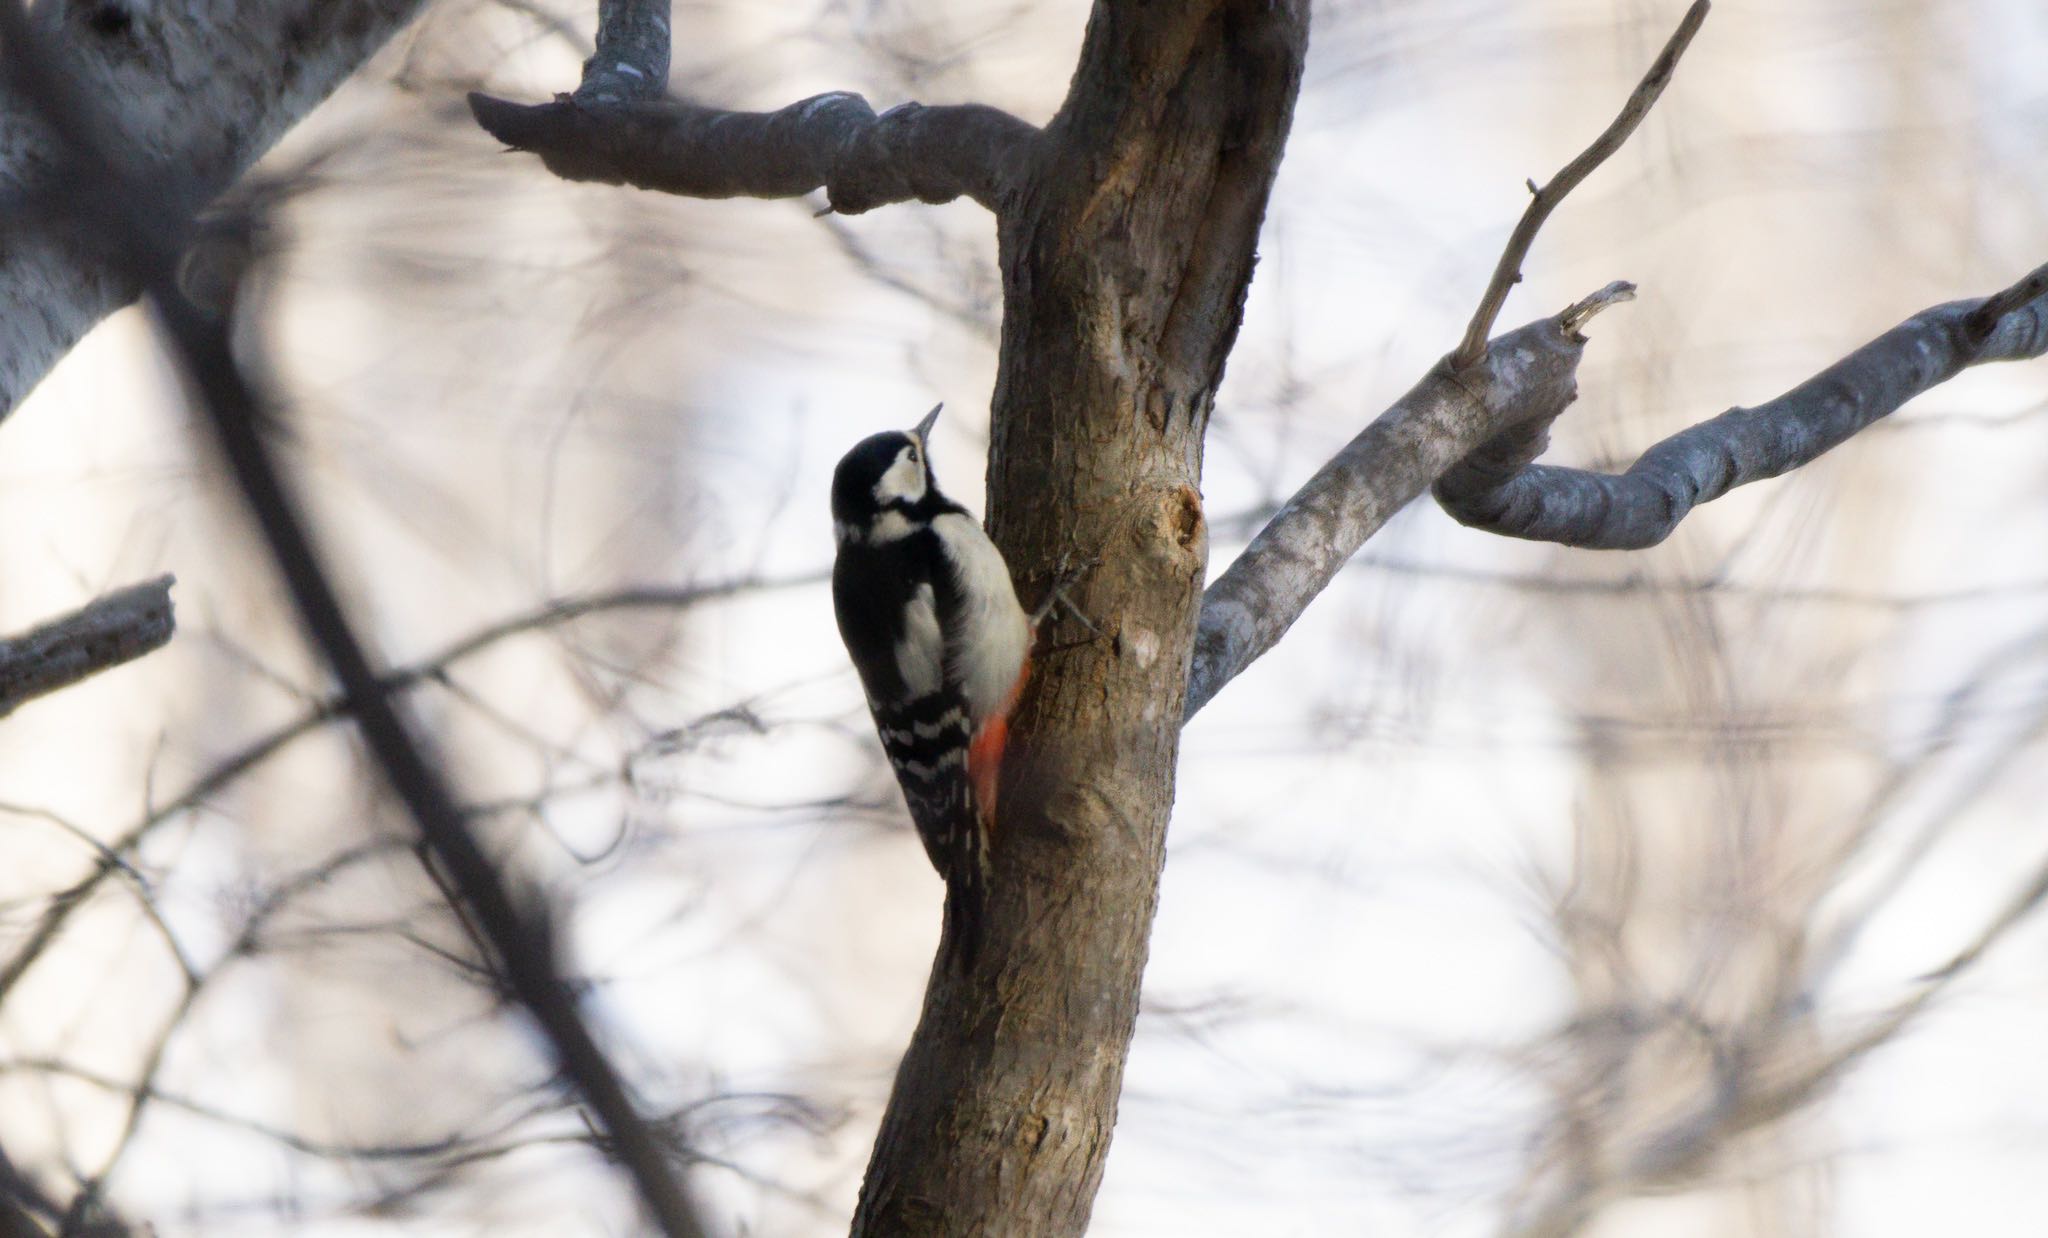 Photo of Great Spotted Woodpecker(japonicus) at Nishioka Park by マルCU